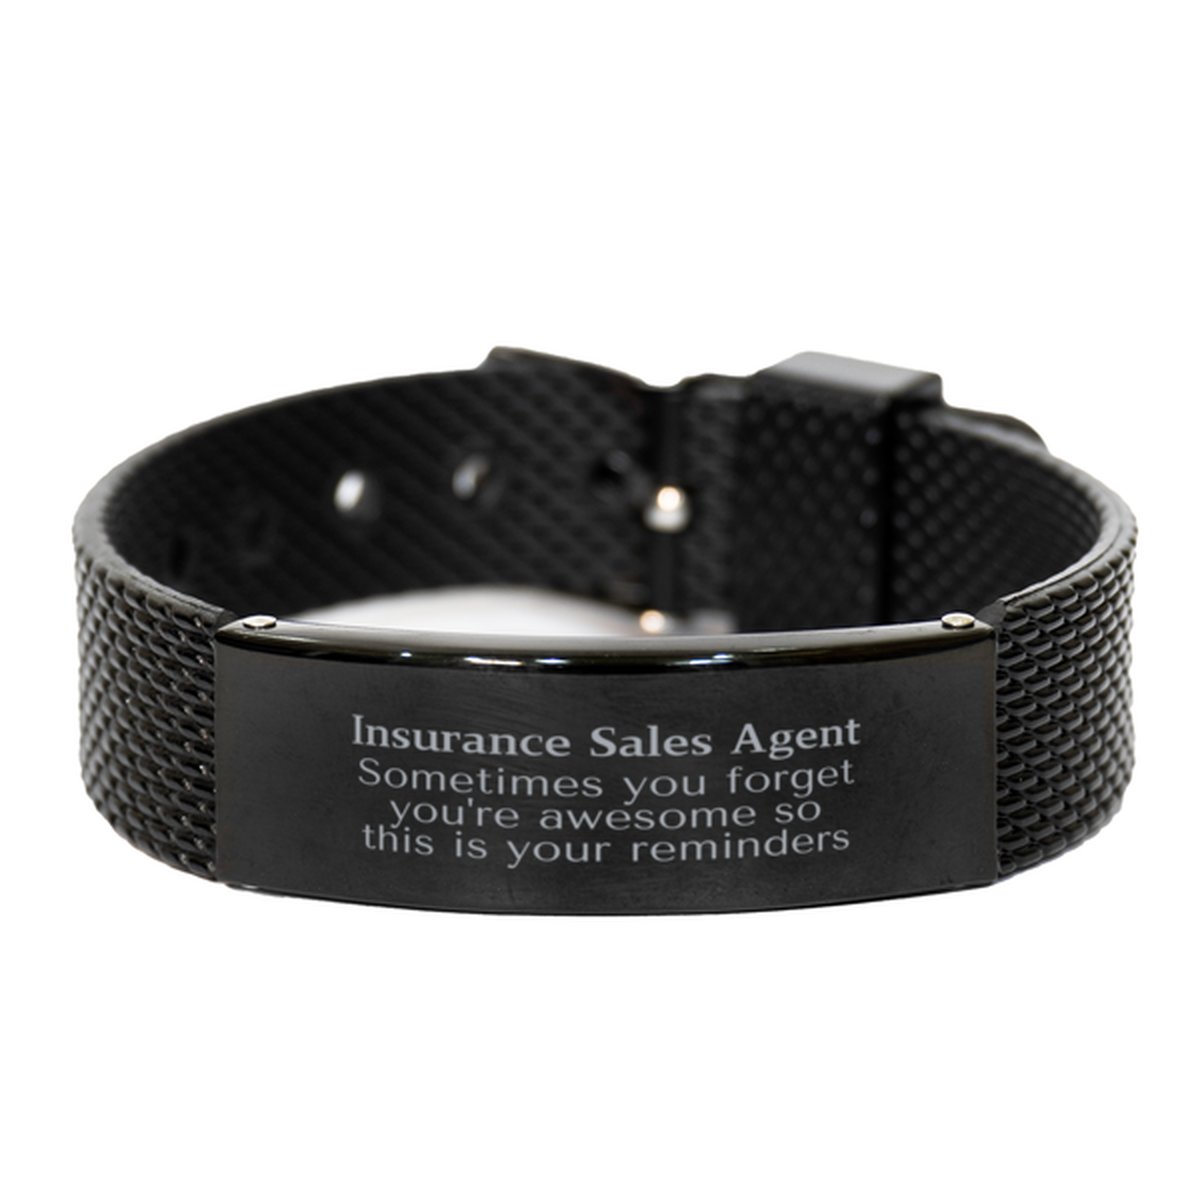 Sentimental Insurance Sales Agent Black Shark Mesh Bracelet, Insurance Sales Agent Sometimes you forget you're awesome so this is your reminders, Graduation Christmas Birthday Gifts for Insurance Sales Agent, Men, Women, Coworkers